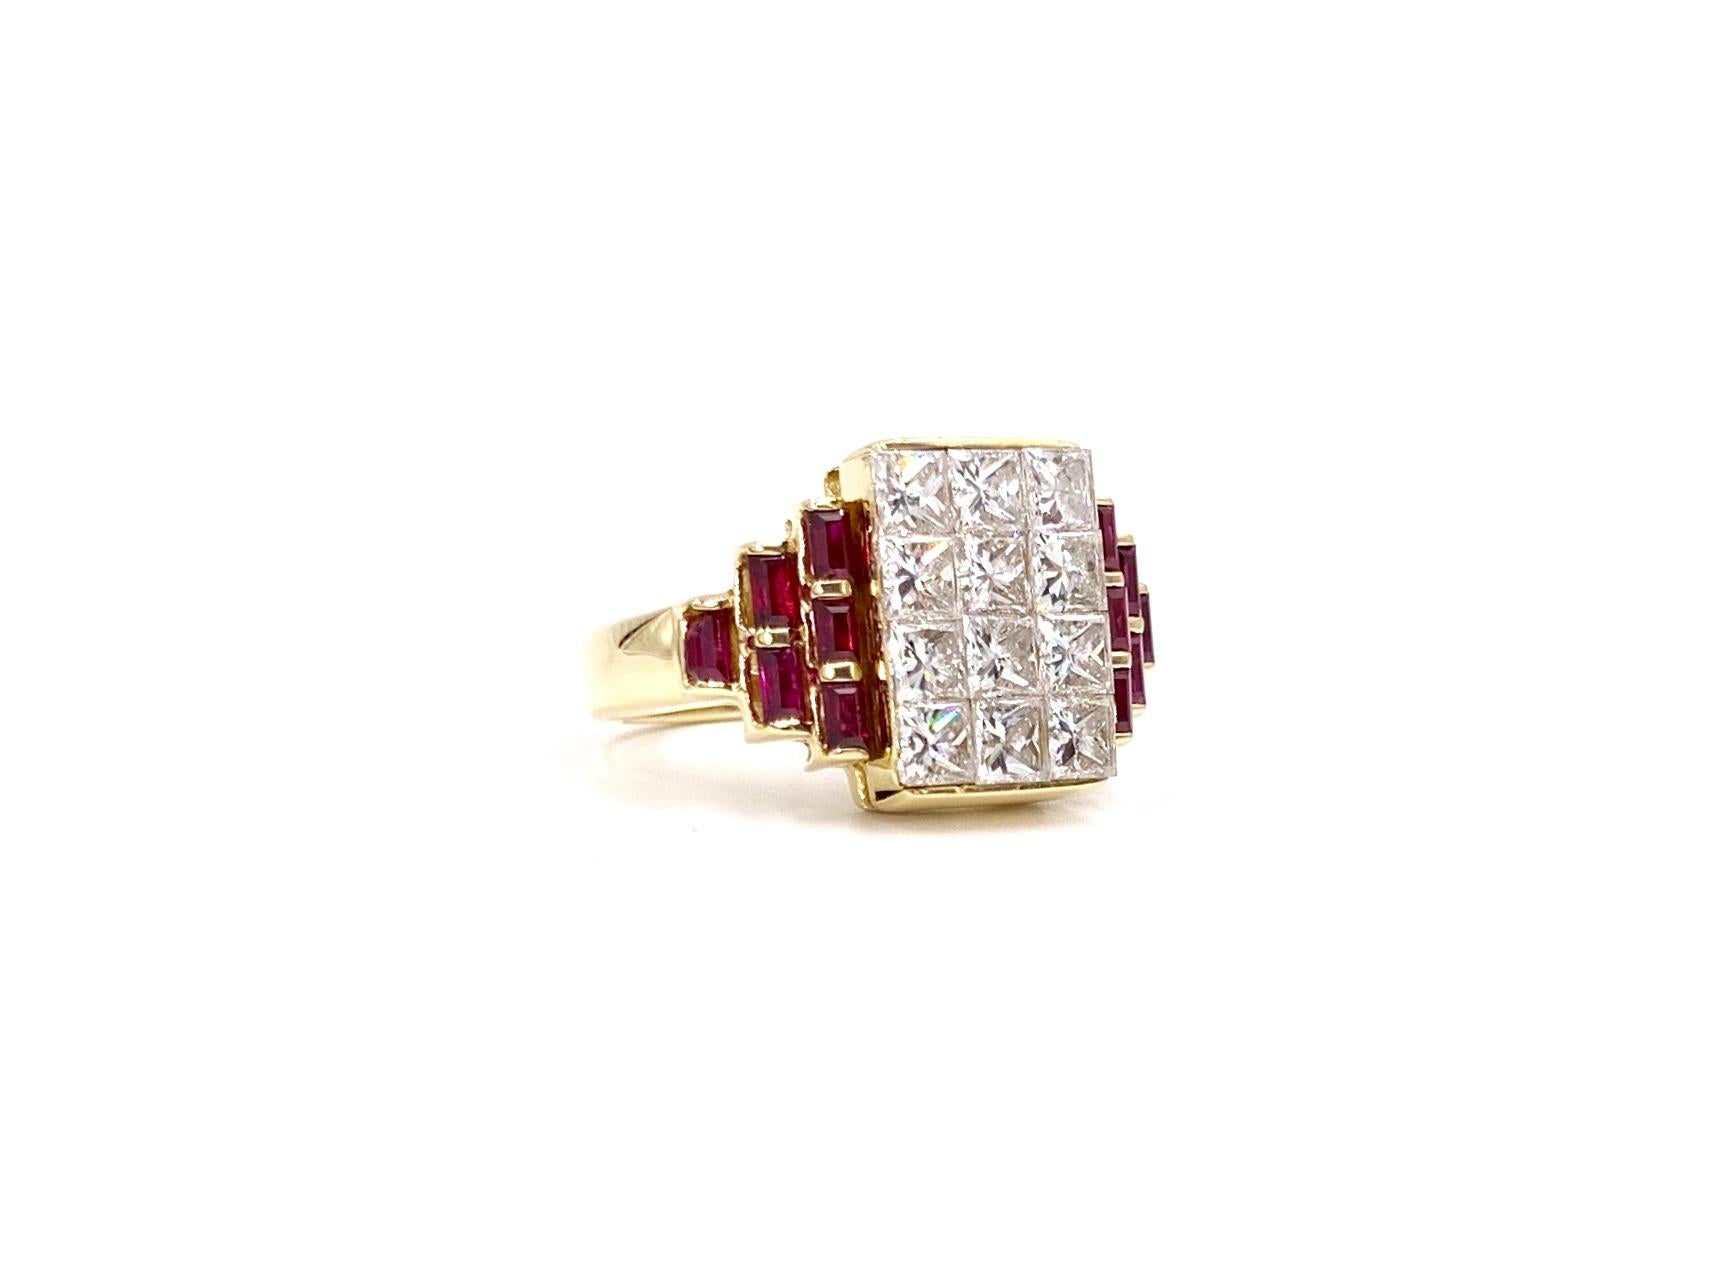 A very well made contemporary cocktail ring with an Art Deco inspired flair featuring 12 expertly invisibly set princess cut high quality diamonds at approximately 1.44 carats total weight flanked by 12 vivid rubies at approximately .75 carats total